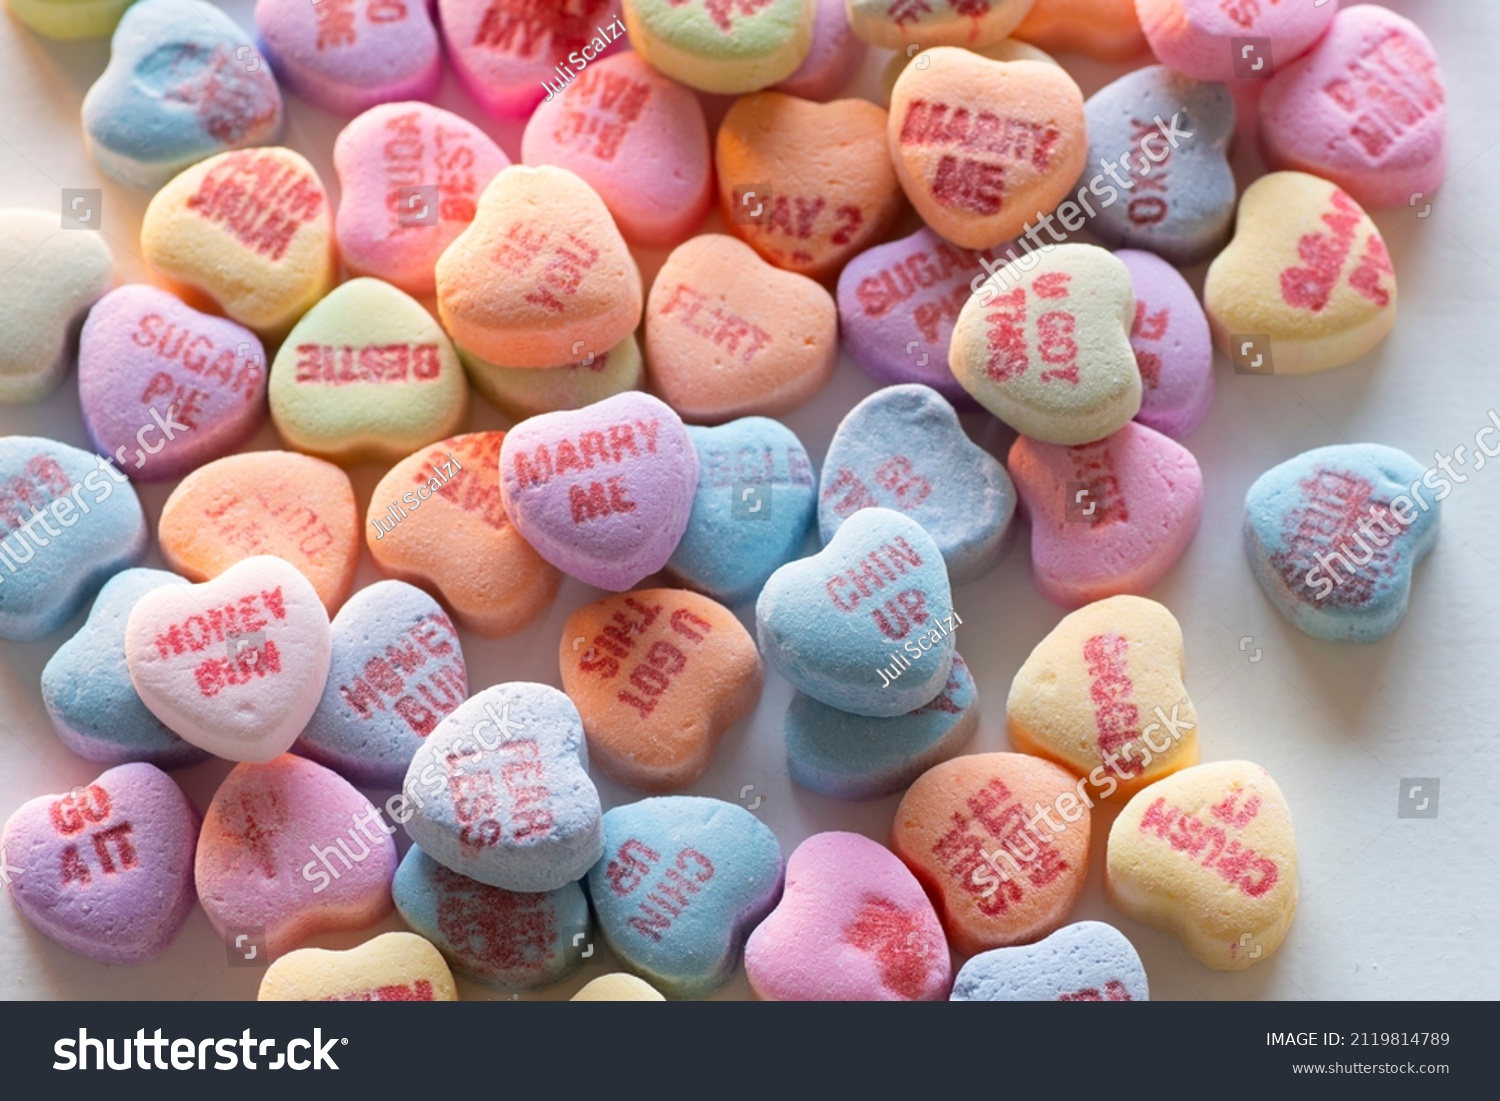 Valentine's Day Sweetheart Candy messages #2119814789